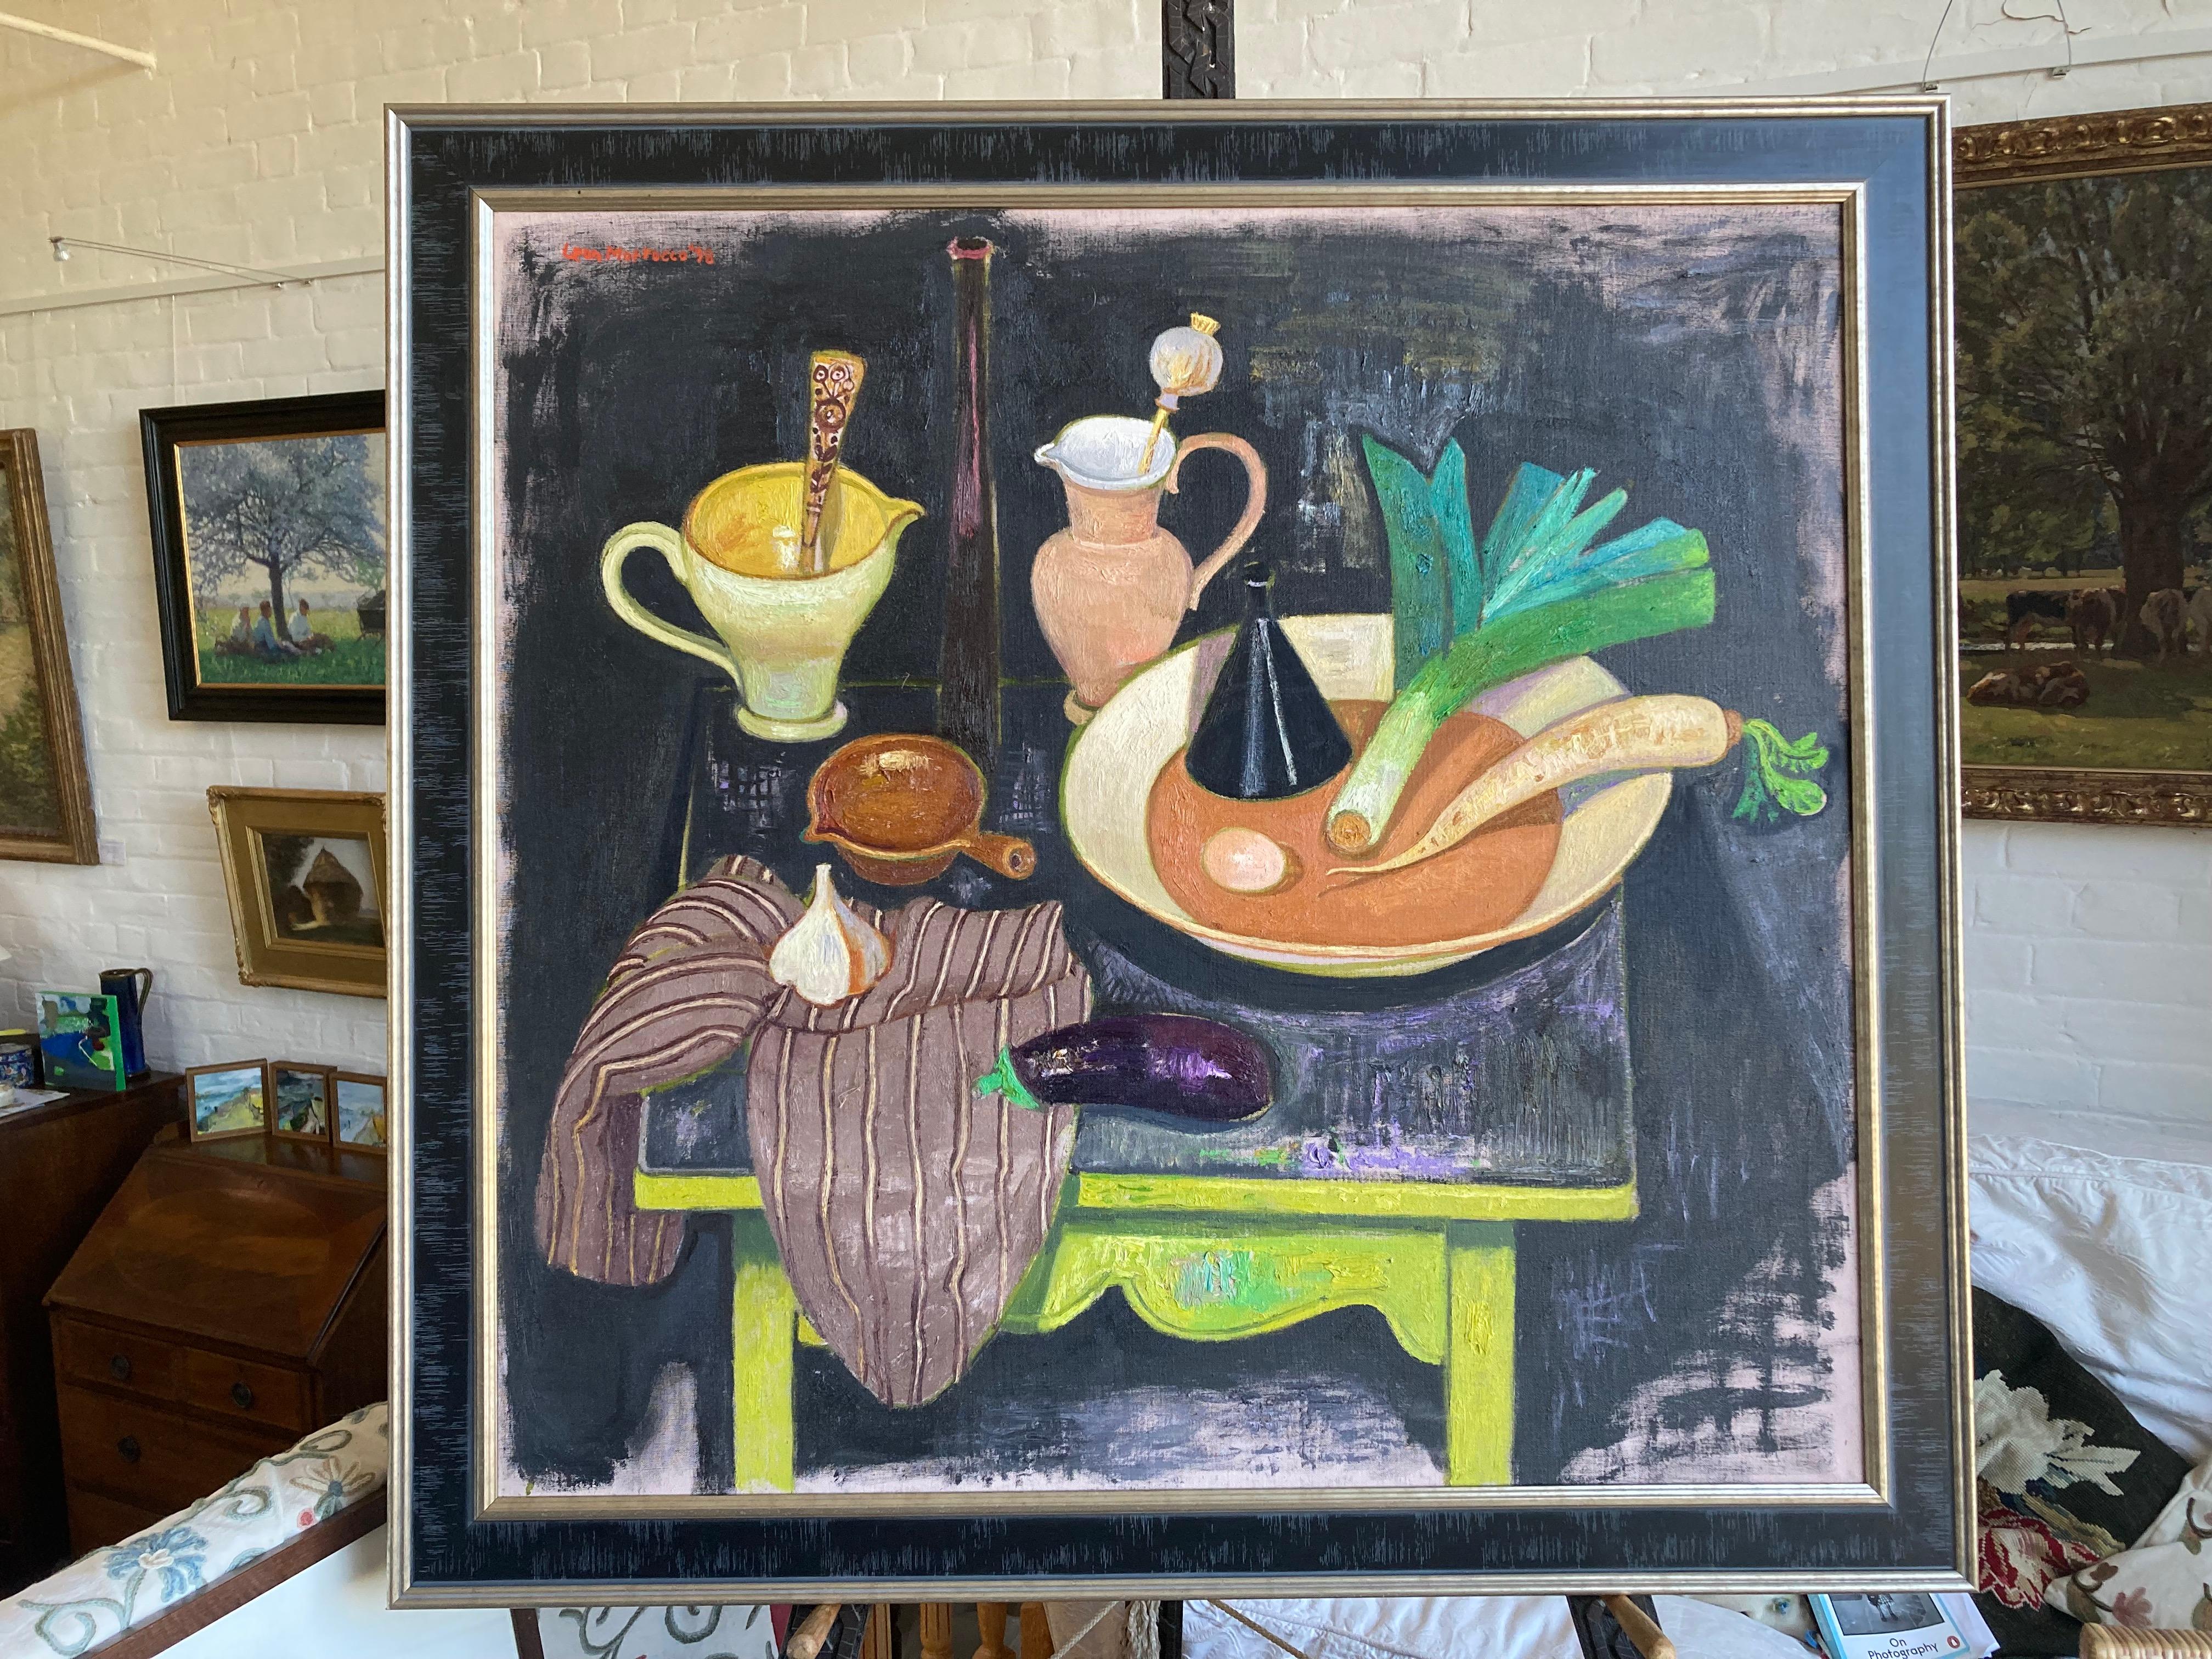 A large, very striking still life by one of the great figures in Scottish painting.

Leon Morrocco (born 1942)
A still life with vegetables, jugs and ceramics on a table
Signed and dated 1998
Oil on canvas
34 x 36, excluding the frame
39 x 41 with